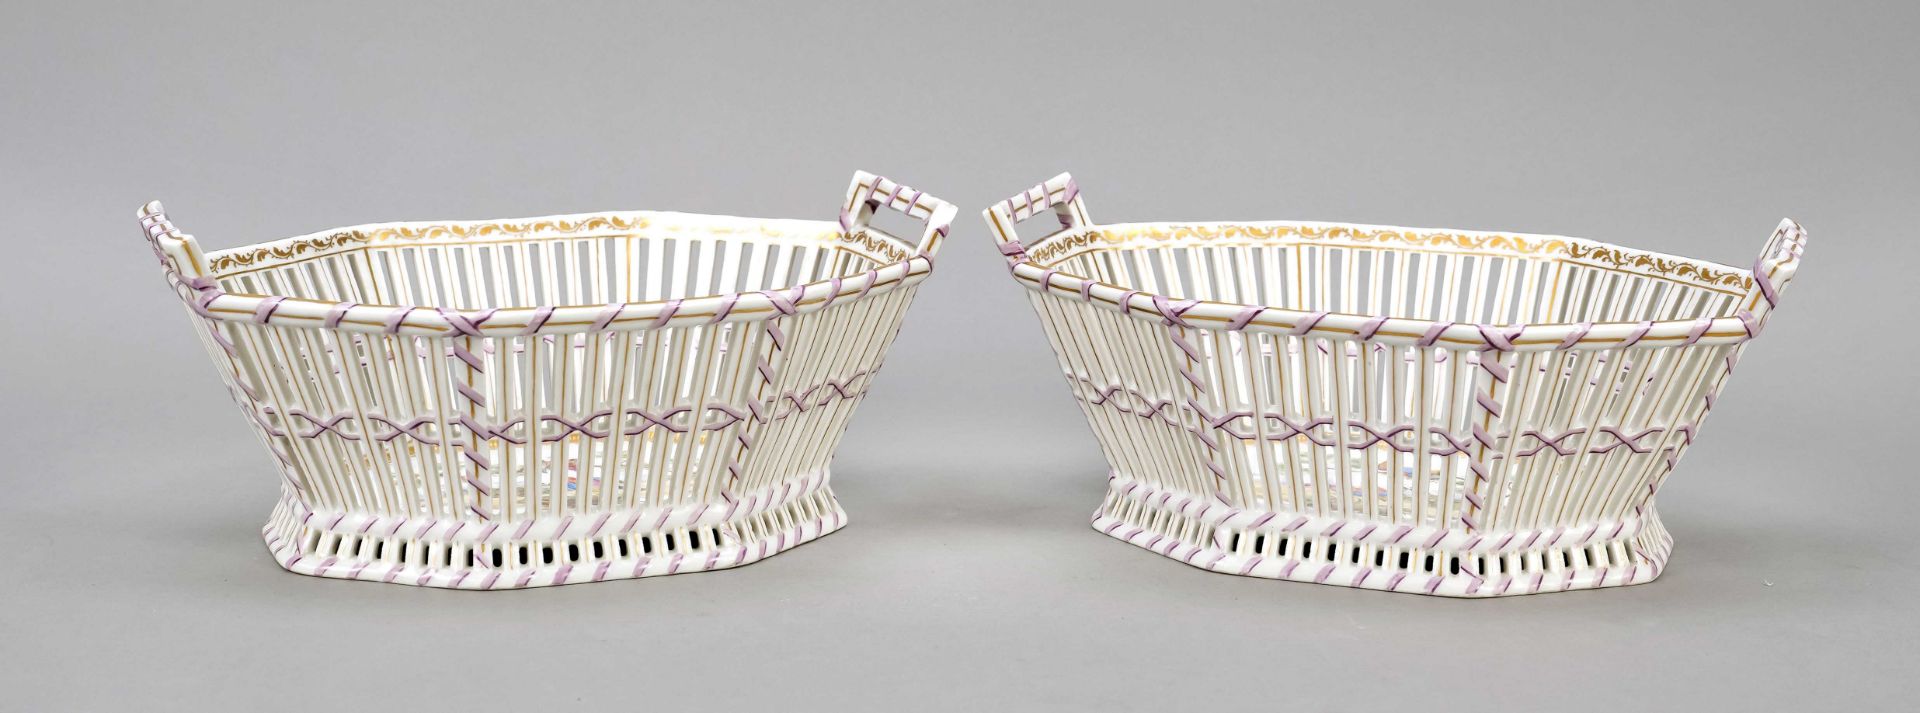 Two basket bowls, KPM Berlin, 20th c., Sevres imitation mark, 2nd choice, classicistic form with - Image 2 of 2